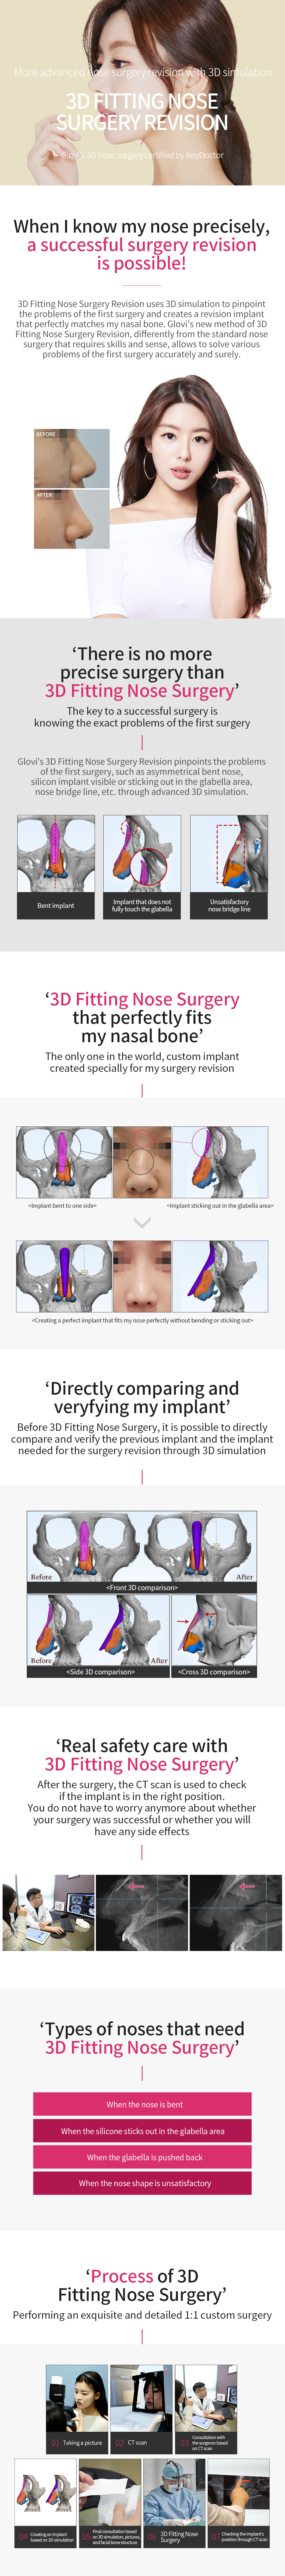 3D Fitting Nose Surgery Revision img